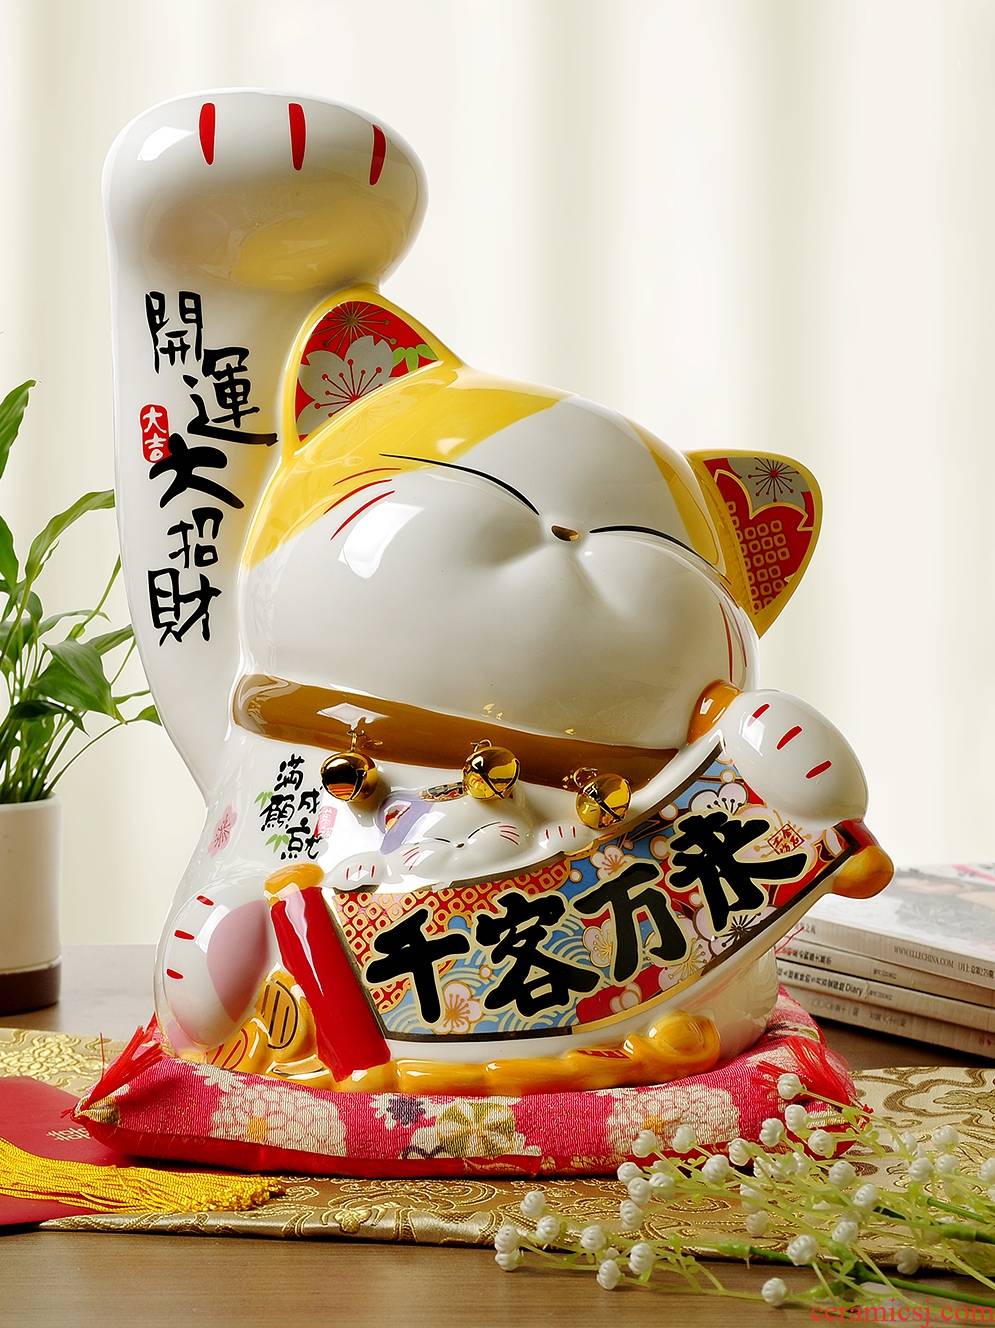 Stone workshop plutus cat ceramic company in the opened shops that occupy the home furnishing articles furnishing articles extra large gifts